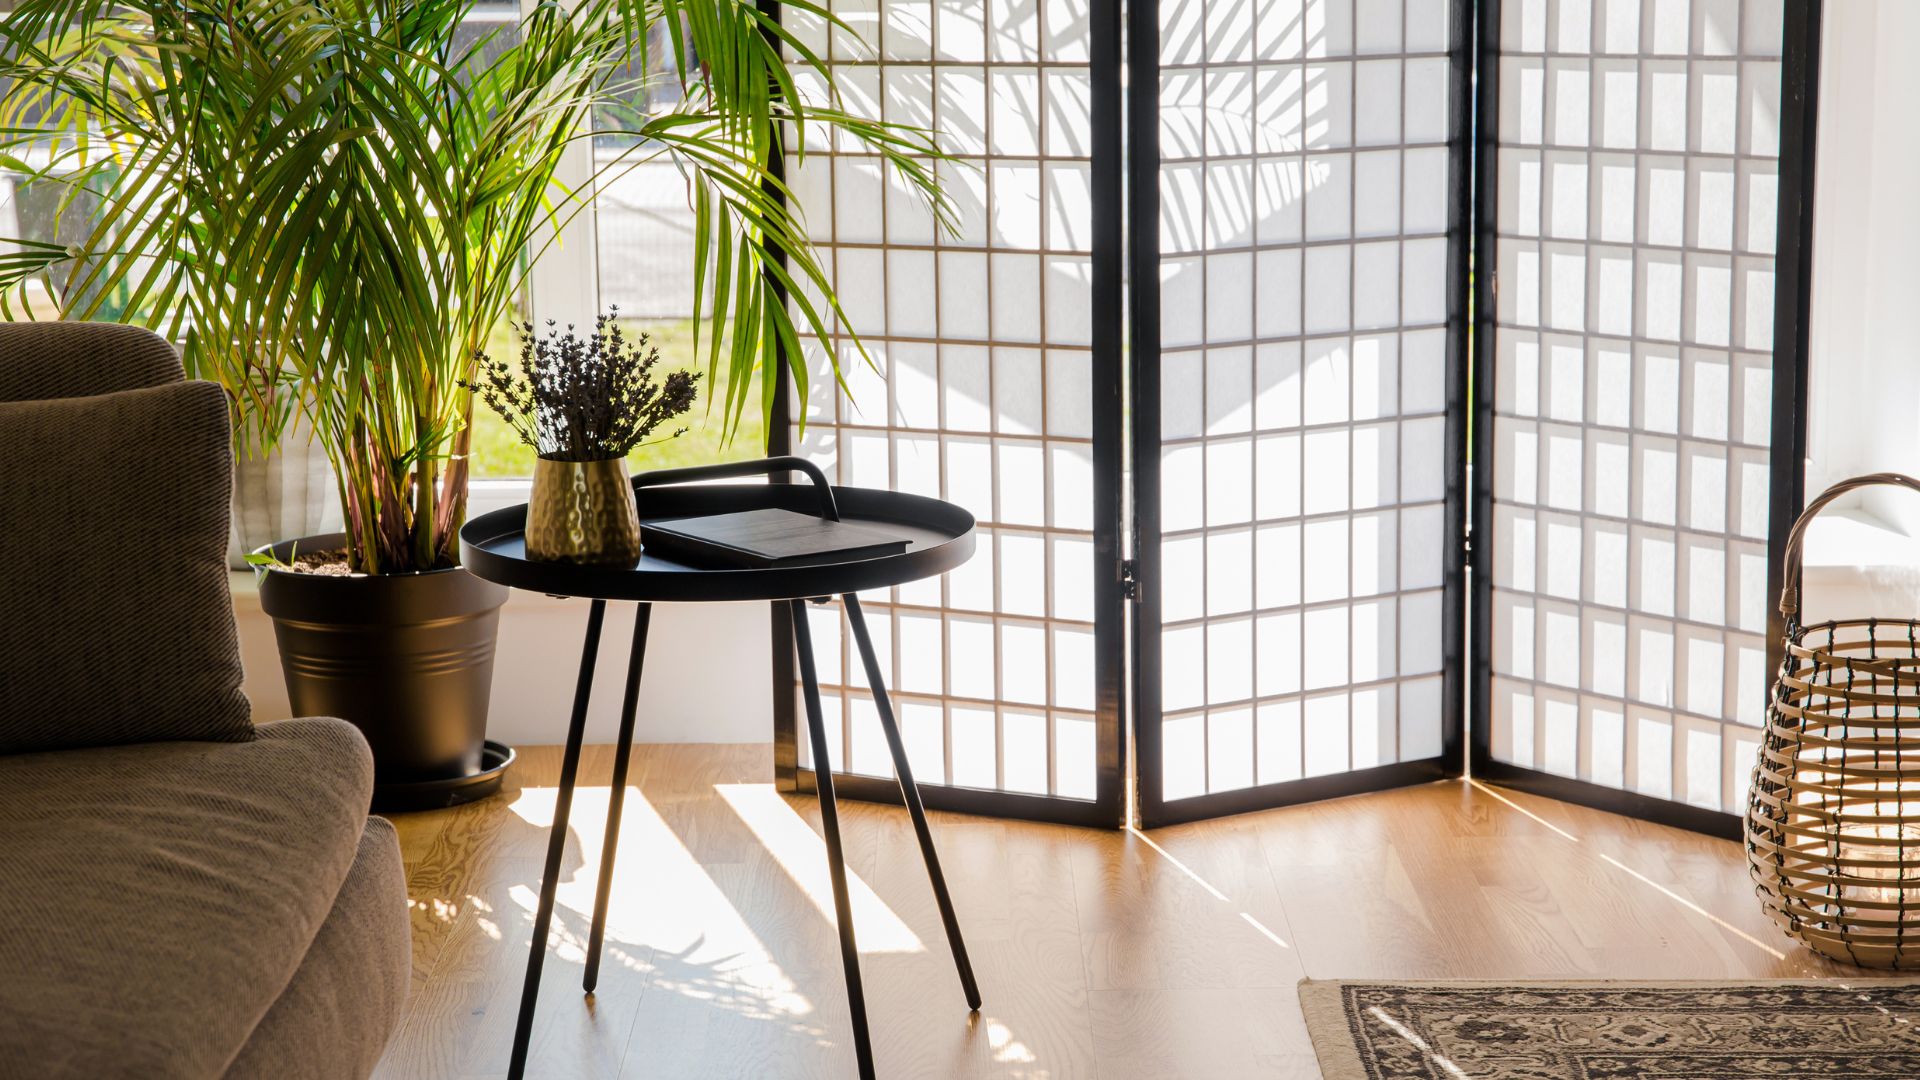 A Japanese-inspired privacy screen in a living room with plants, flowers, rattan basket, and brown couch.